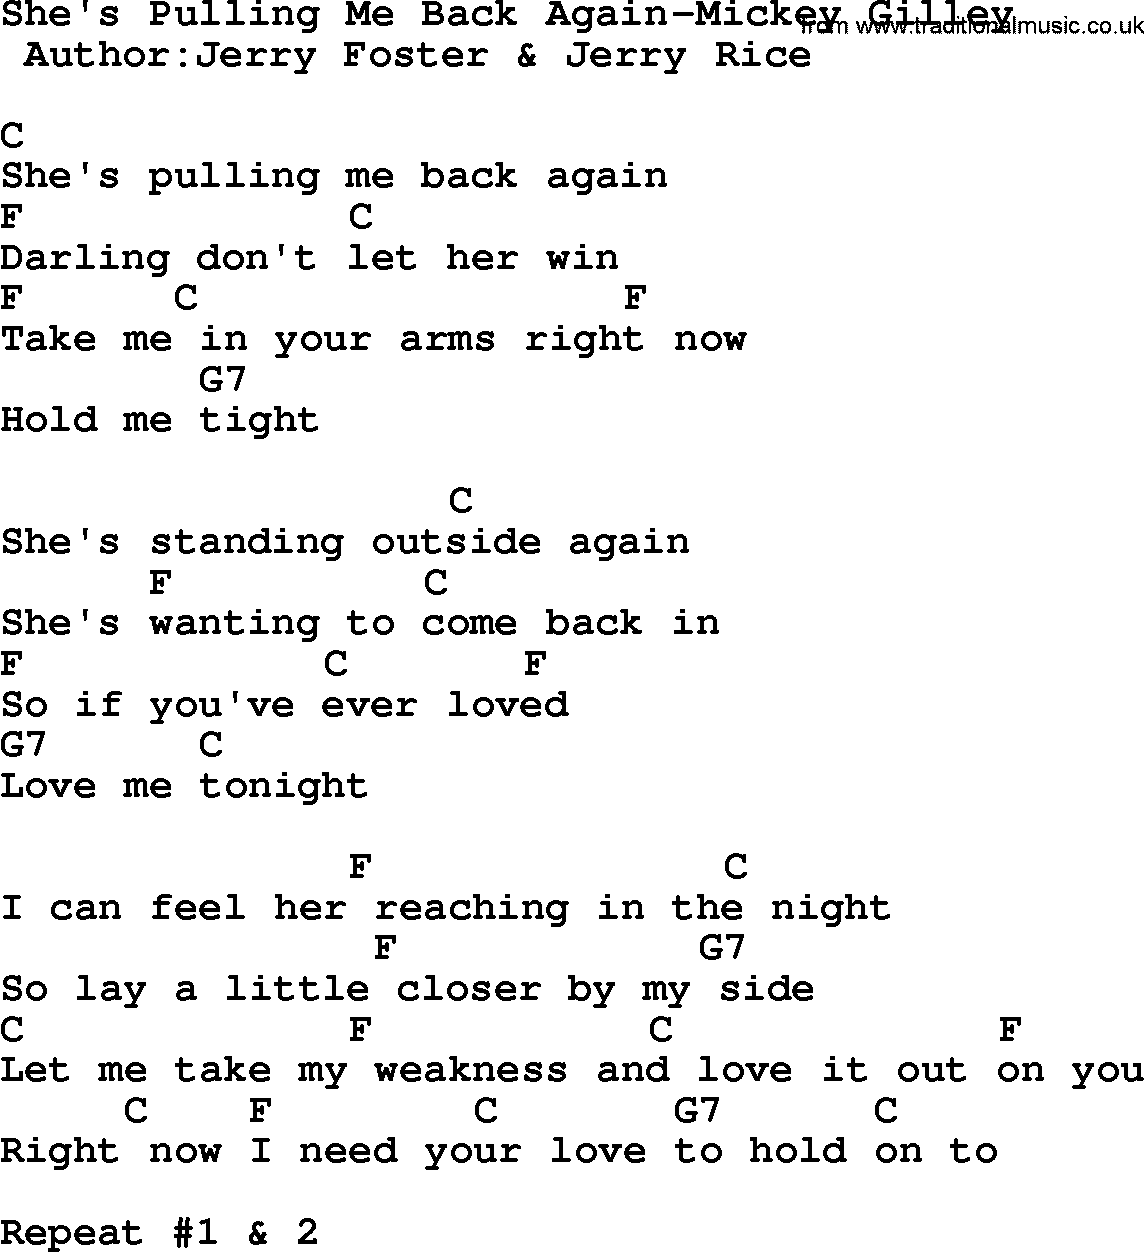 Country music song: She's Pulling Me Back Again-Mickey Gilley lyrics and chords